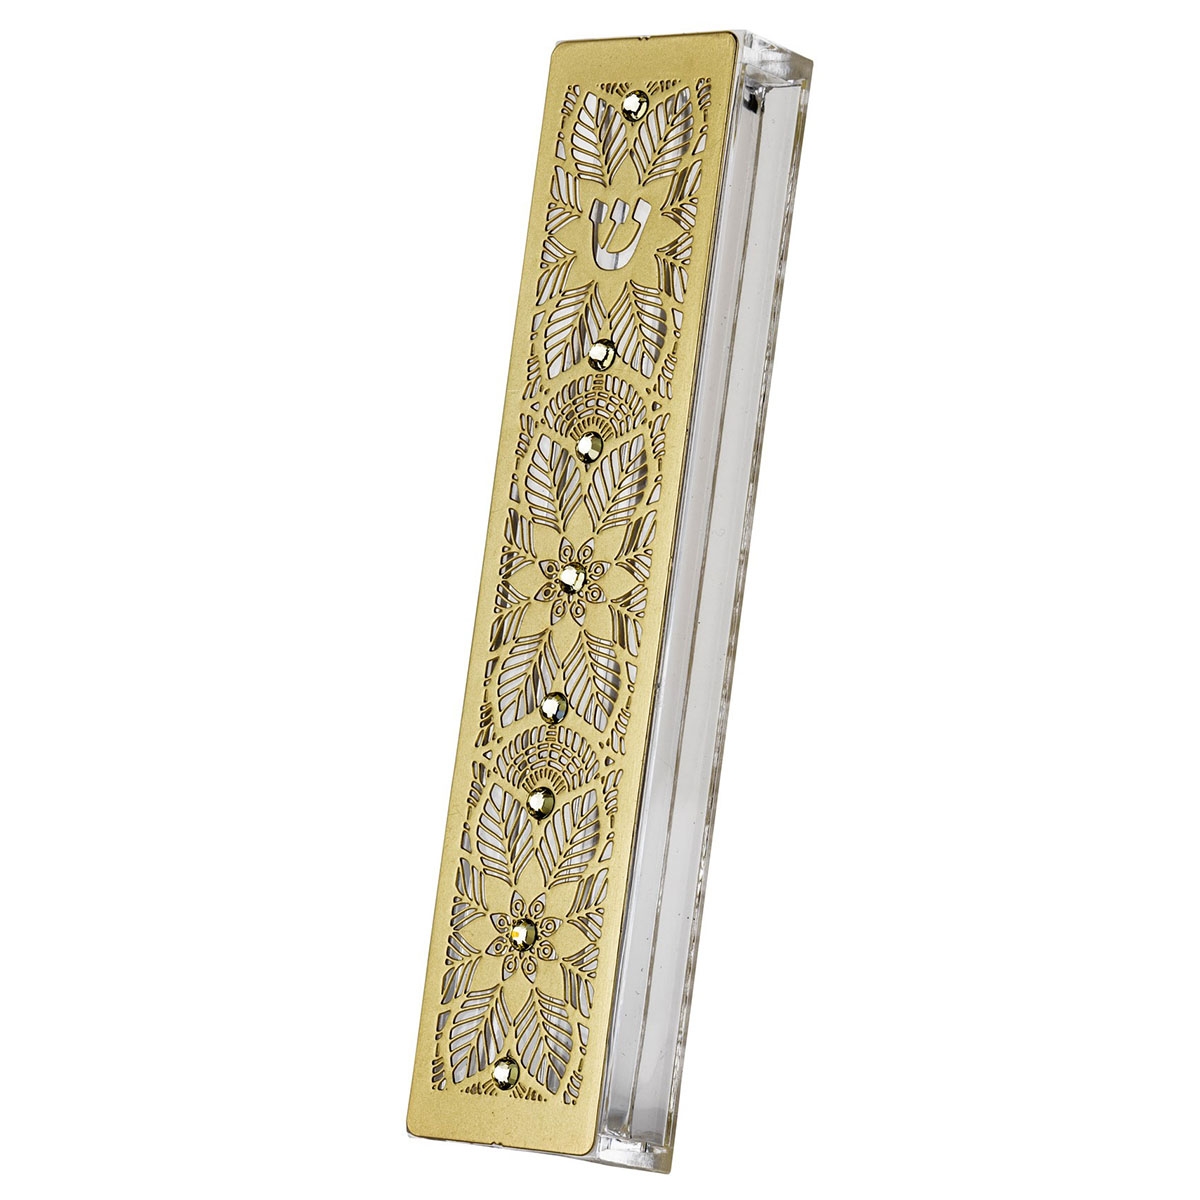 Dorit Judaica Gold-Plated Acrylic Mezuzah Case With Flowers and Leaves - 1